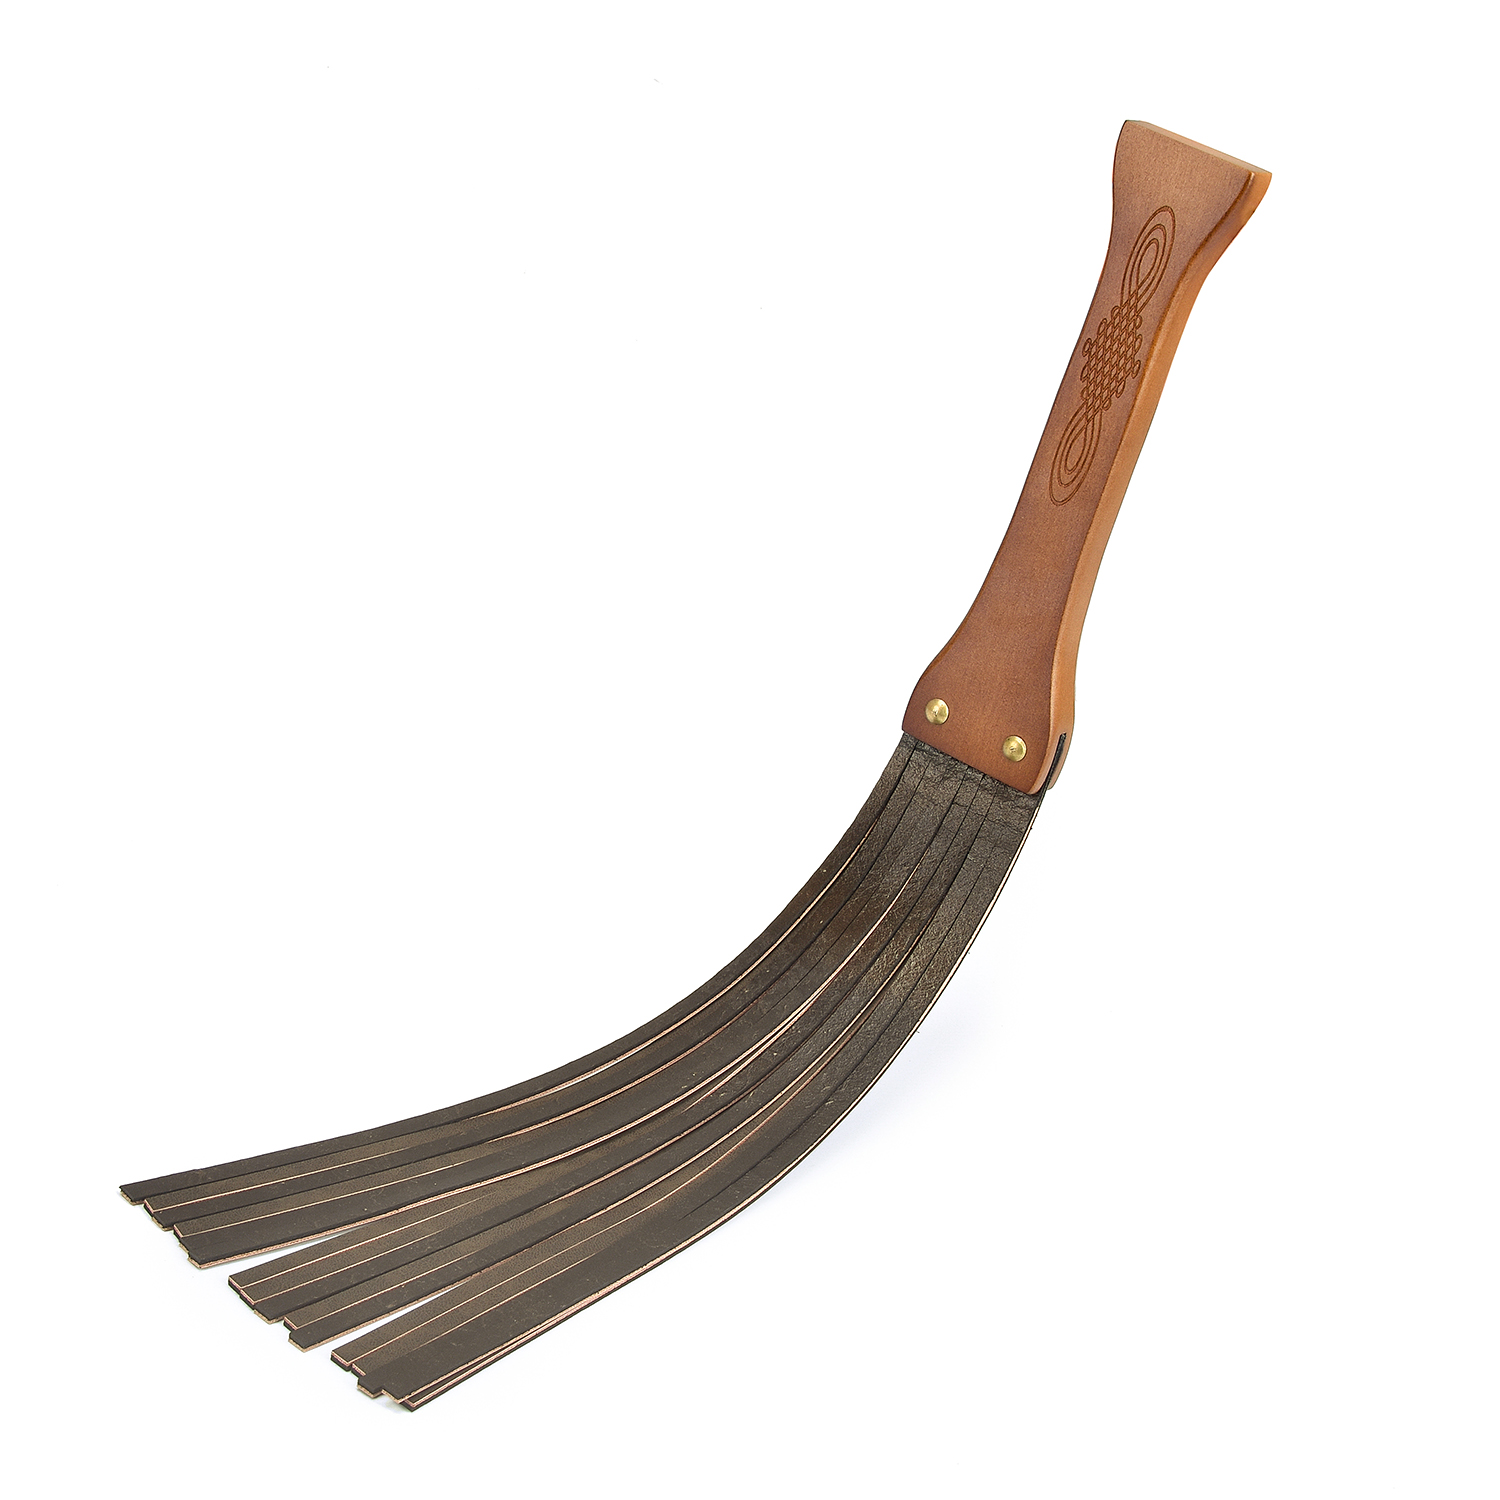 Wooden Handle Thick Leather Flogger